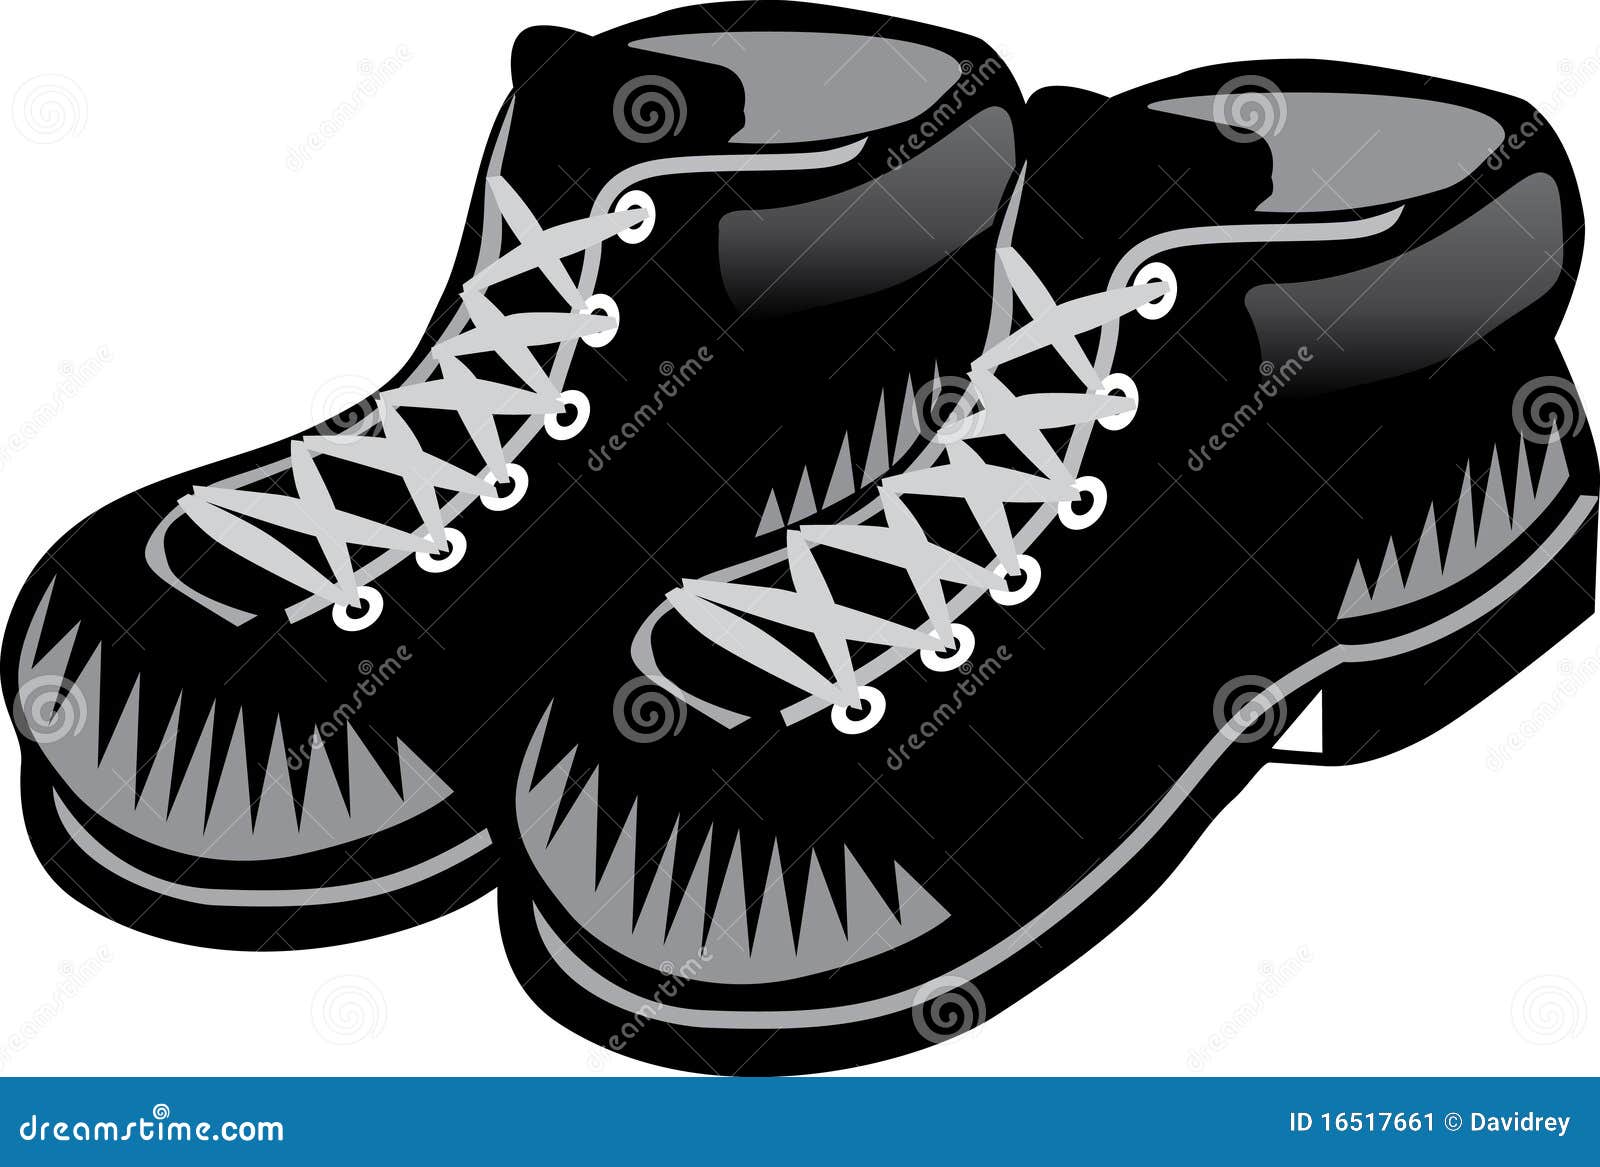 Shoes stock vector. Illustration of clip, cartoon, work - 16517661